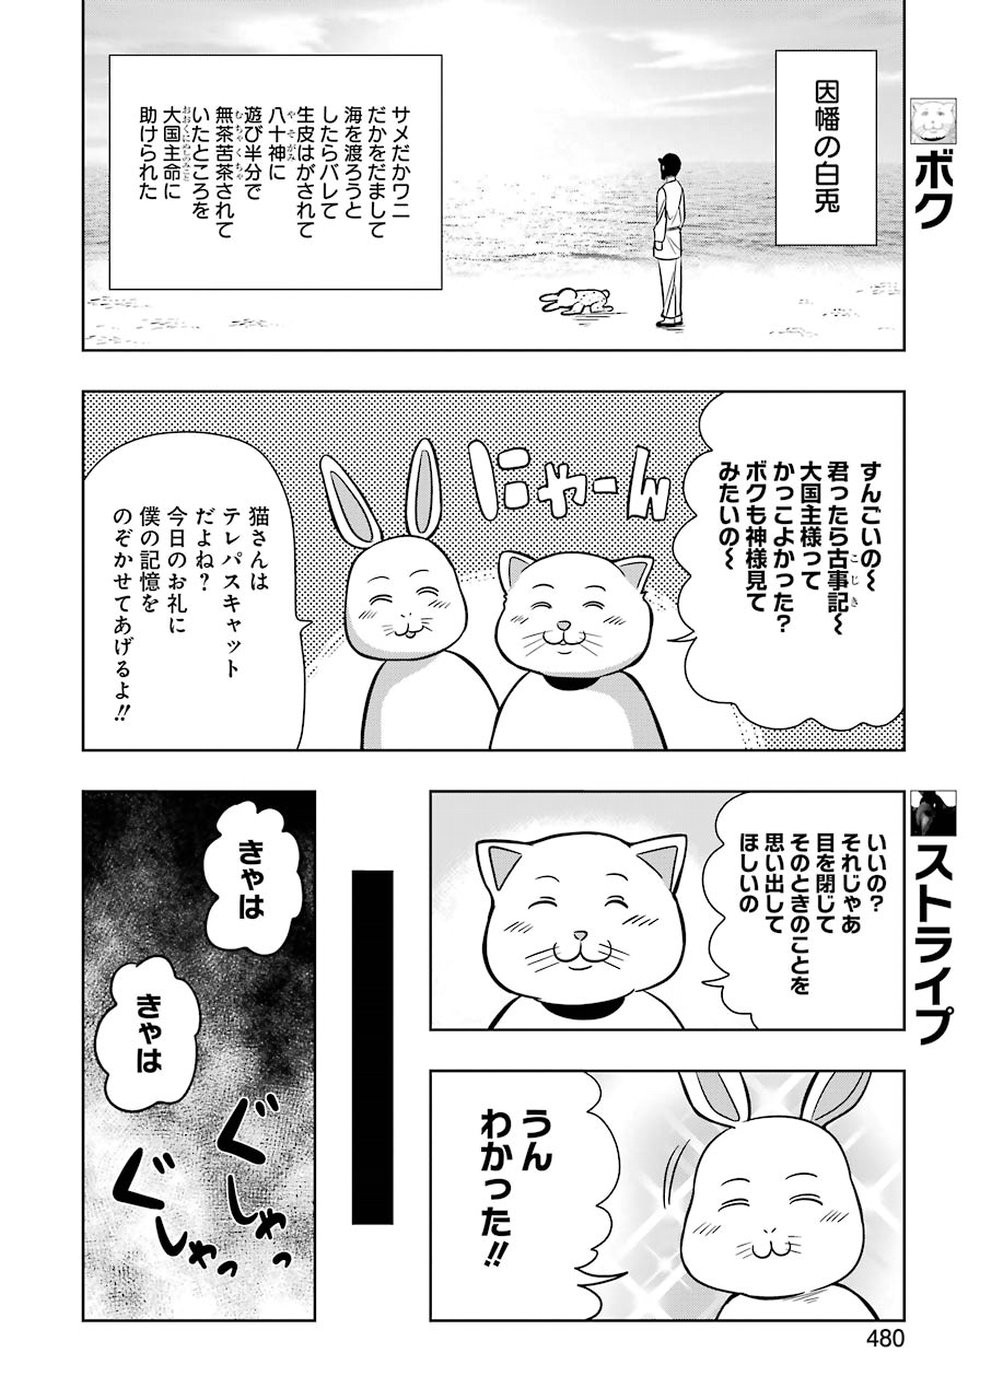 + Tic Nee-san - Chapter 181 - Page 4